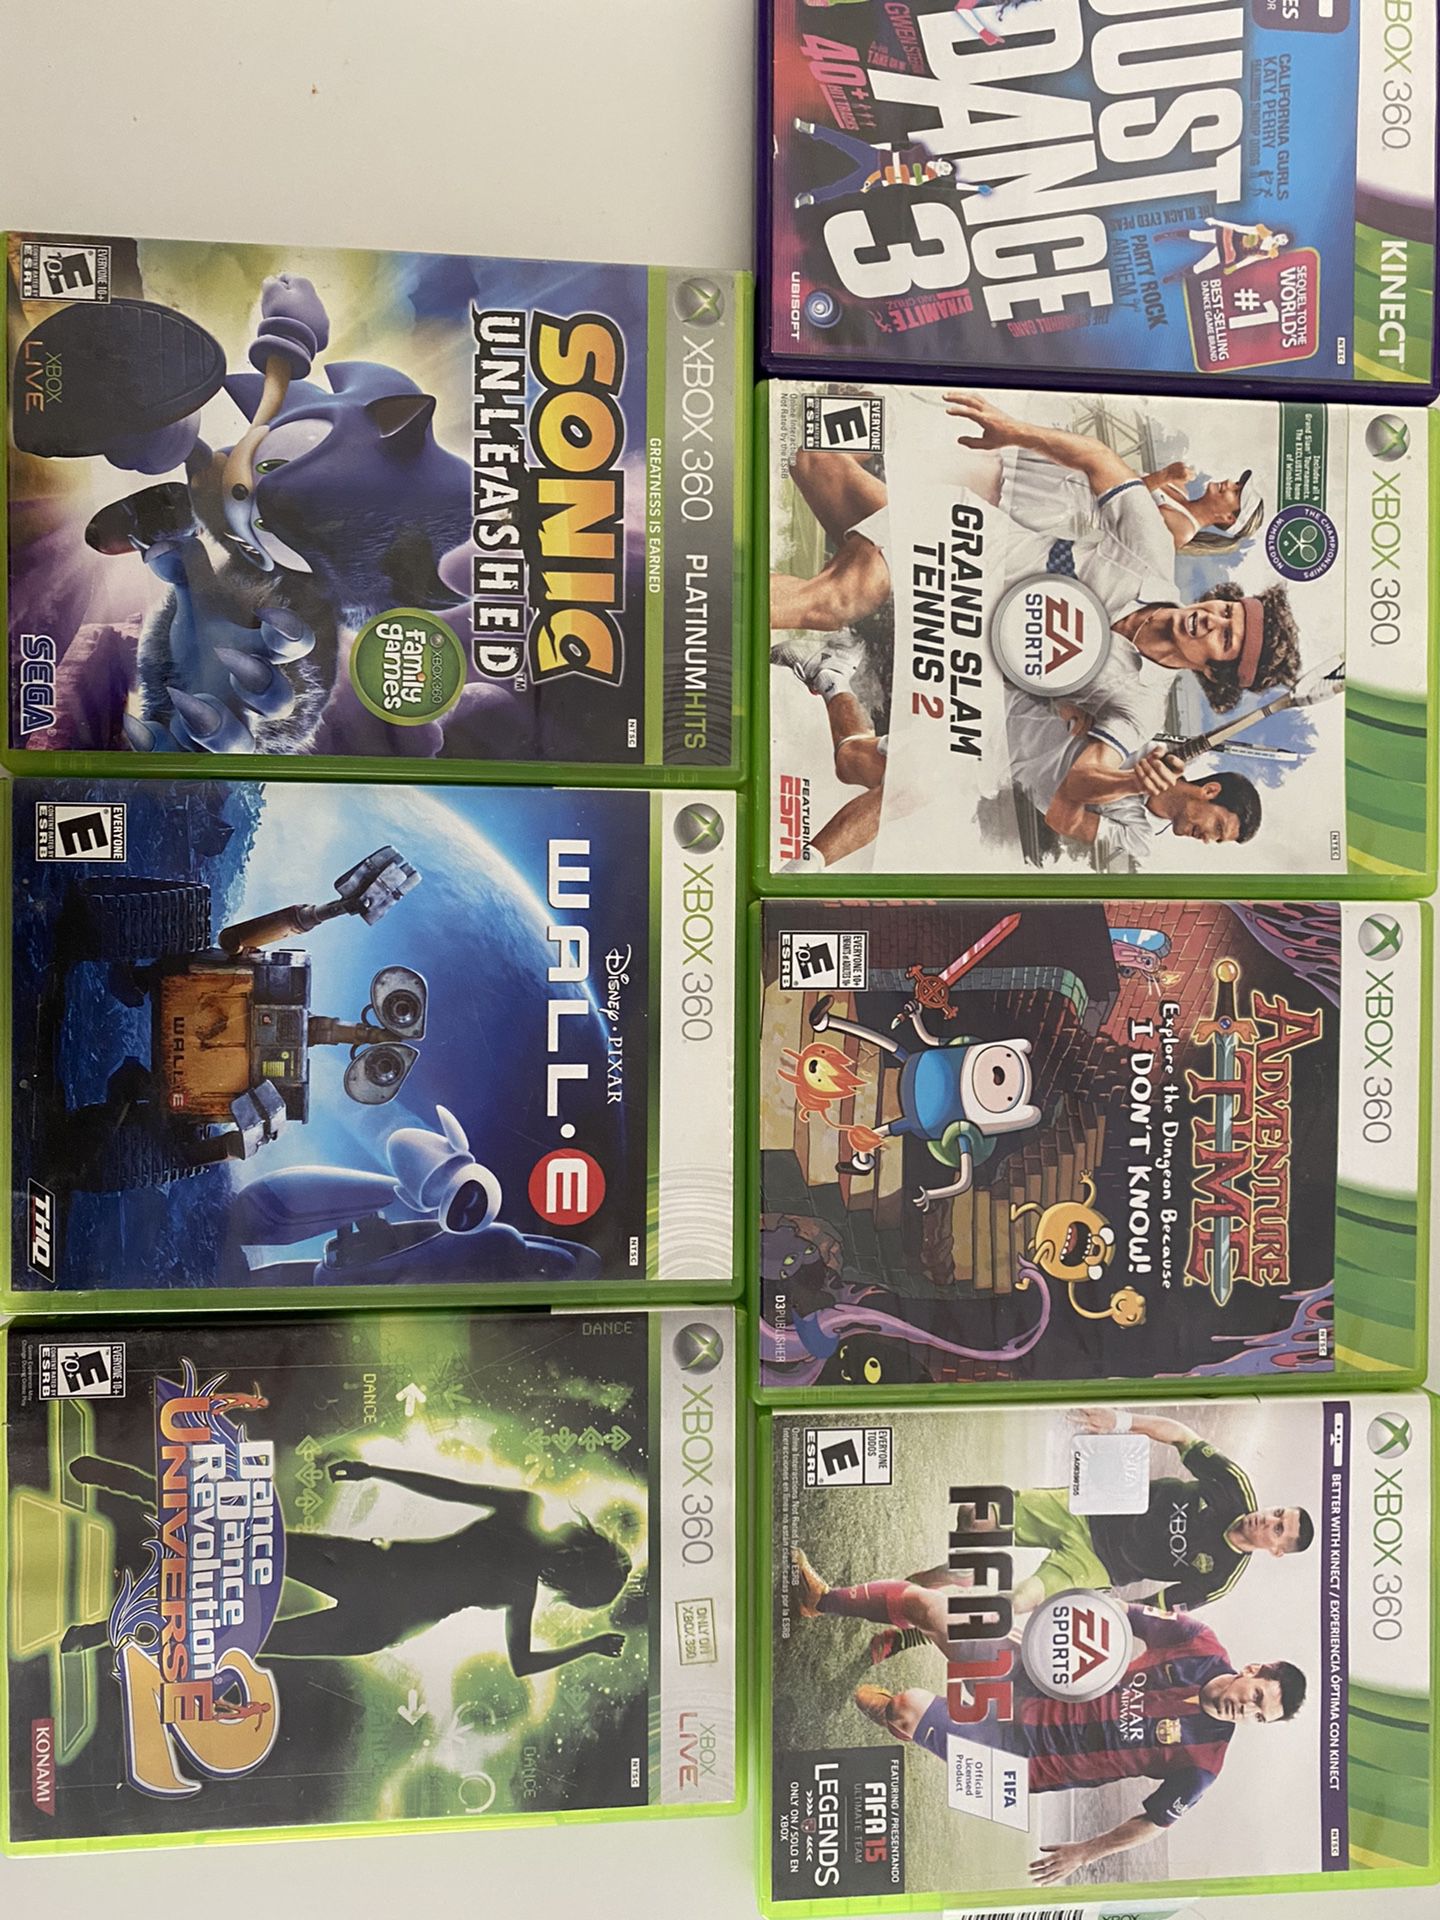 XBOX 360 games , asking for 45$ for all the games , willing to negotiate :)